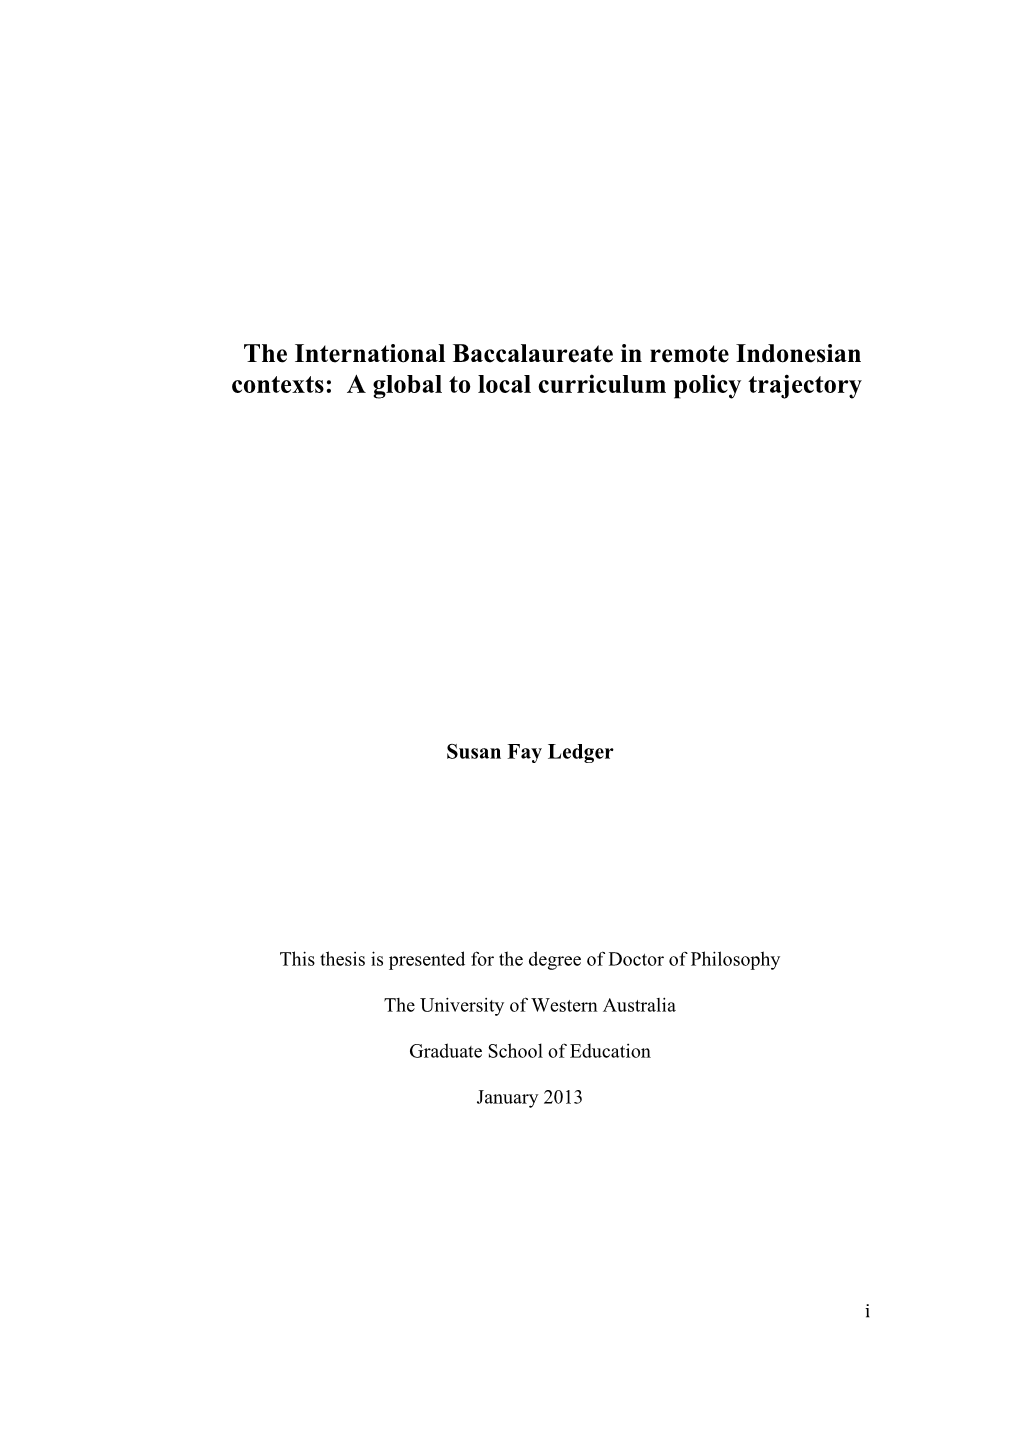 The International Baccalaureate in Remote Indonesian Contexts: a Global to Local Curriculum Policy Trajectory